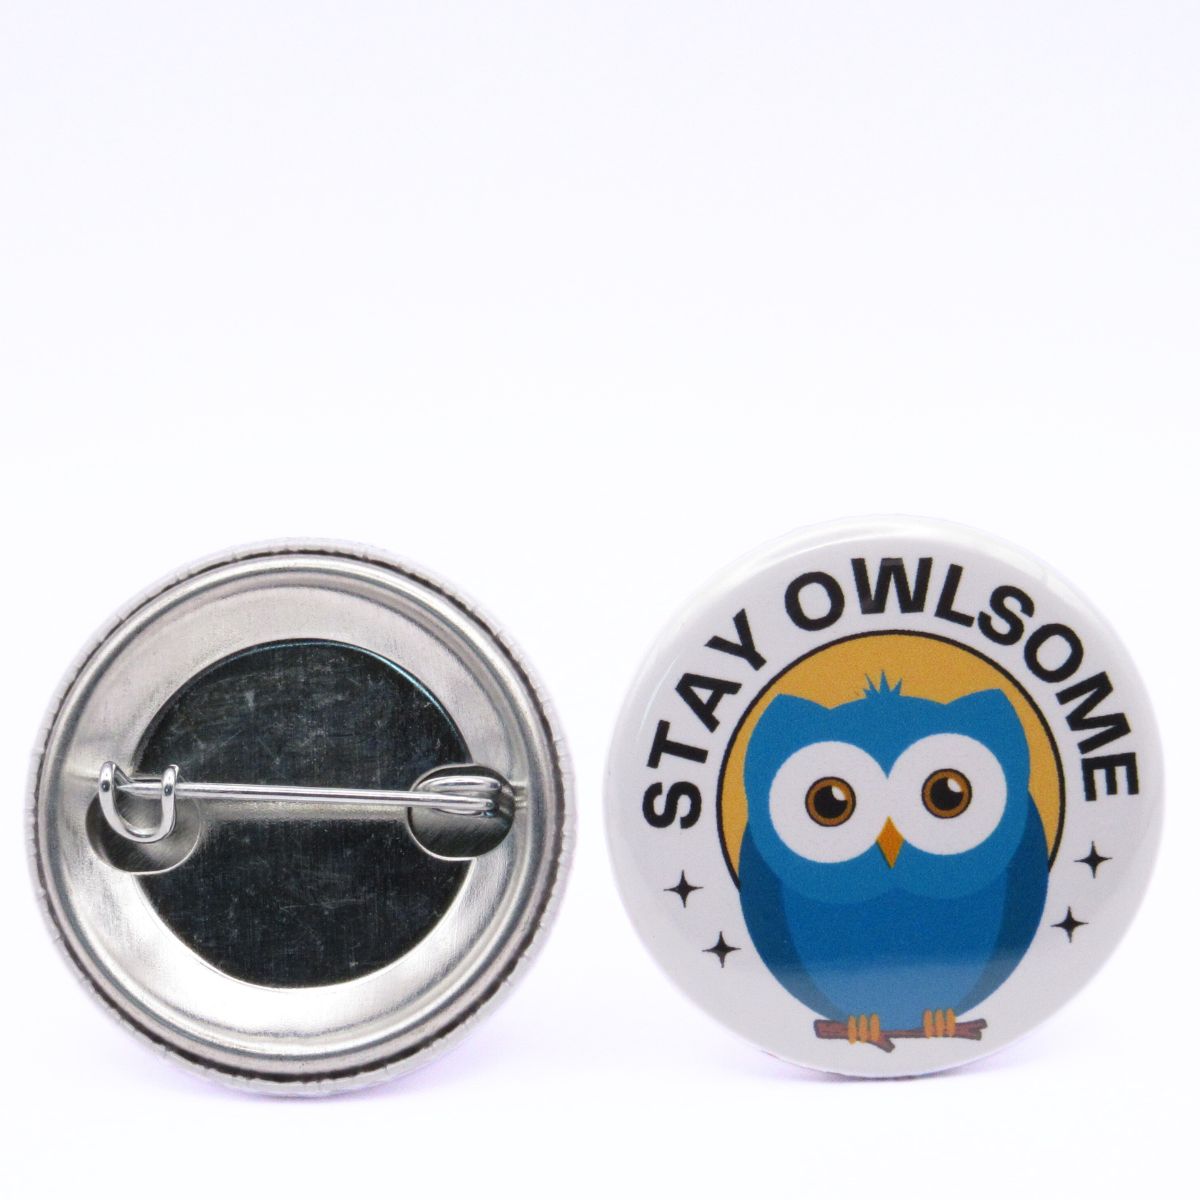 BooBooRoo Pinback Button (i.e. button, badge, pin) of a Cute blue owl with the text "Stay Owlsome." Image showing front and back of high-quality metal button.